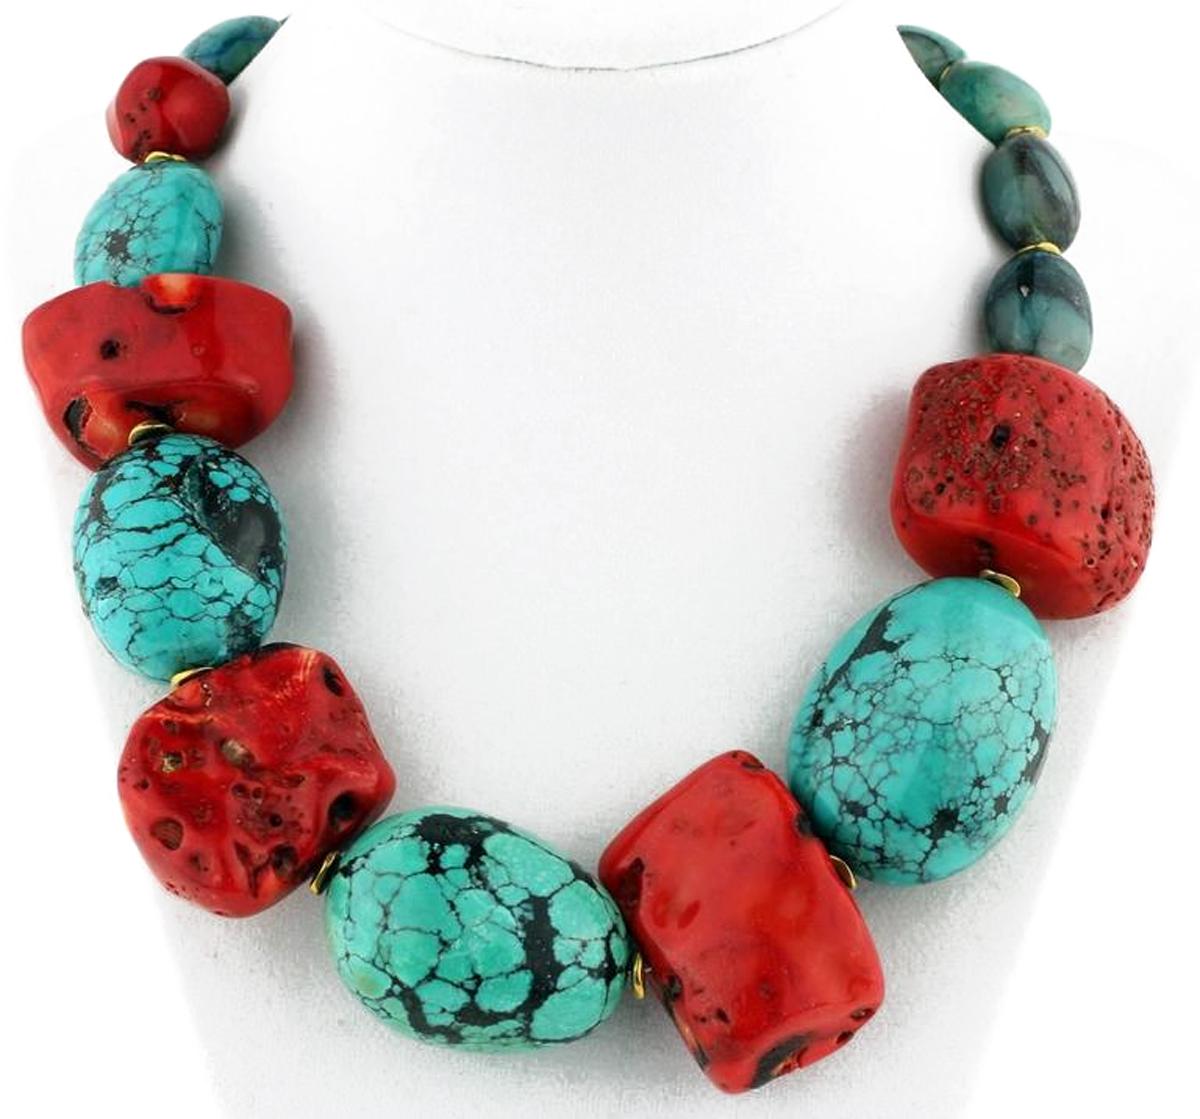 VERY LARGE PIECES OF POLISHED TURQUOISE ACCOMPANIED BY VERY LARGE PIECES OF RED CORAL create the front of this unique handmade necklace.  These pieces reach 44mm x 32mm for the Turquoise and 36mm x 33mm for the Coral.  The  19 inch necklace is